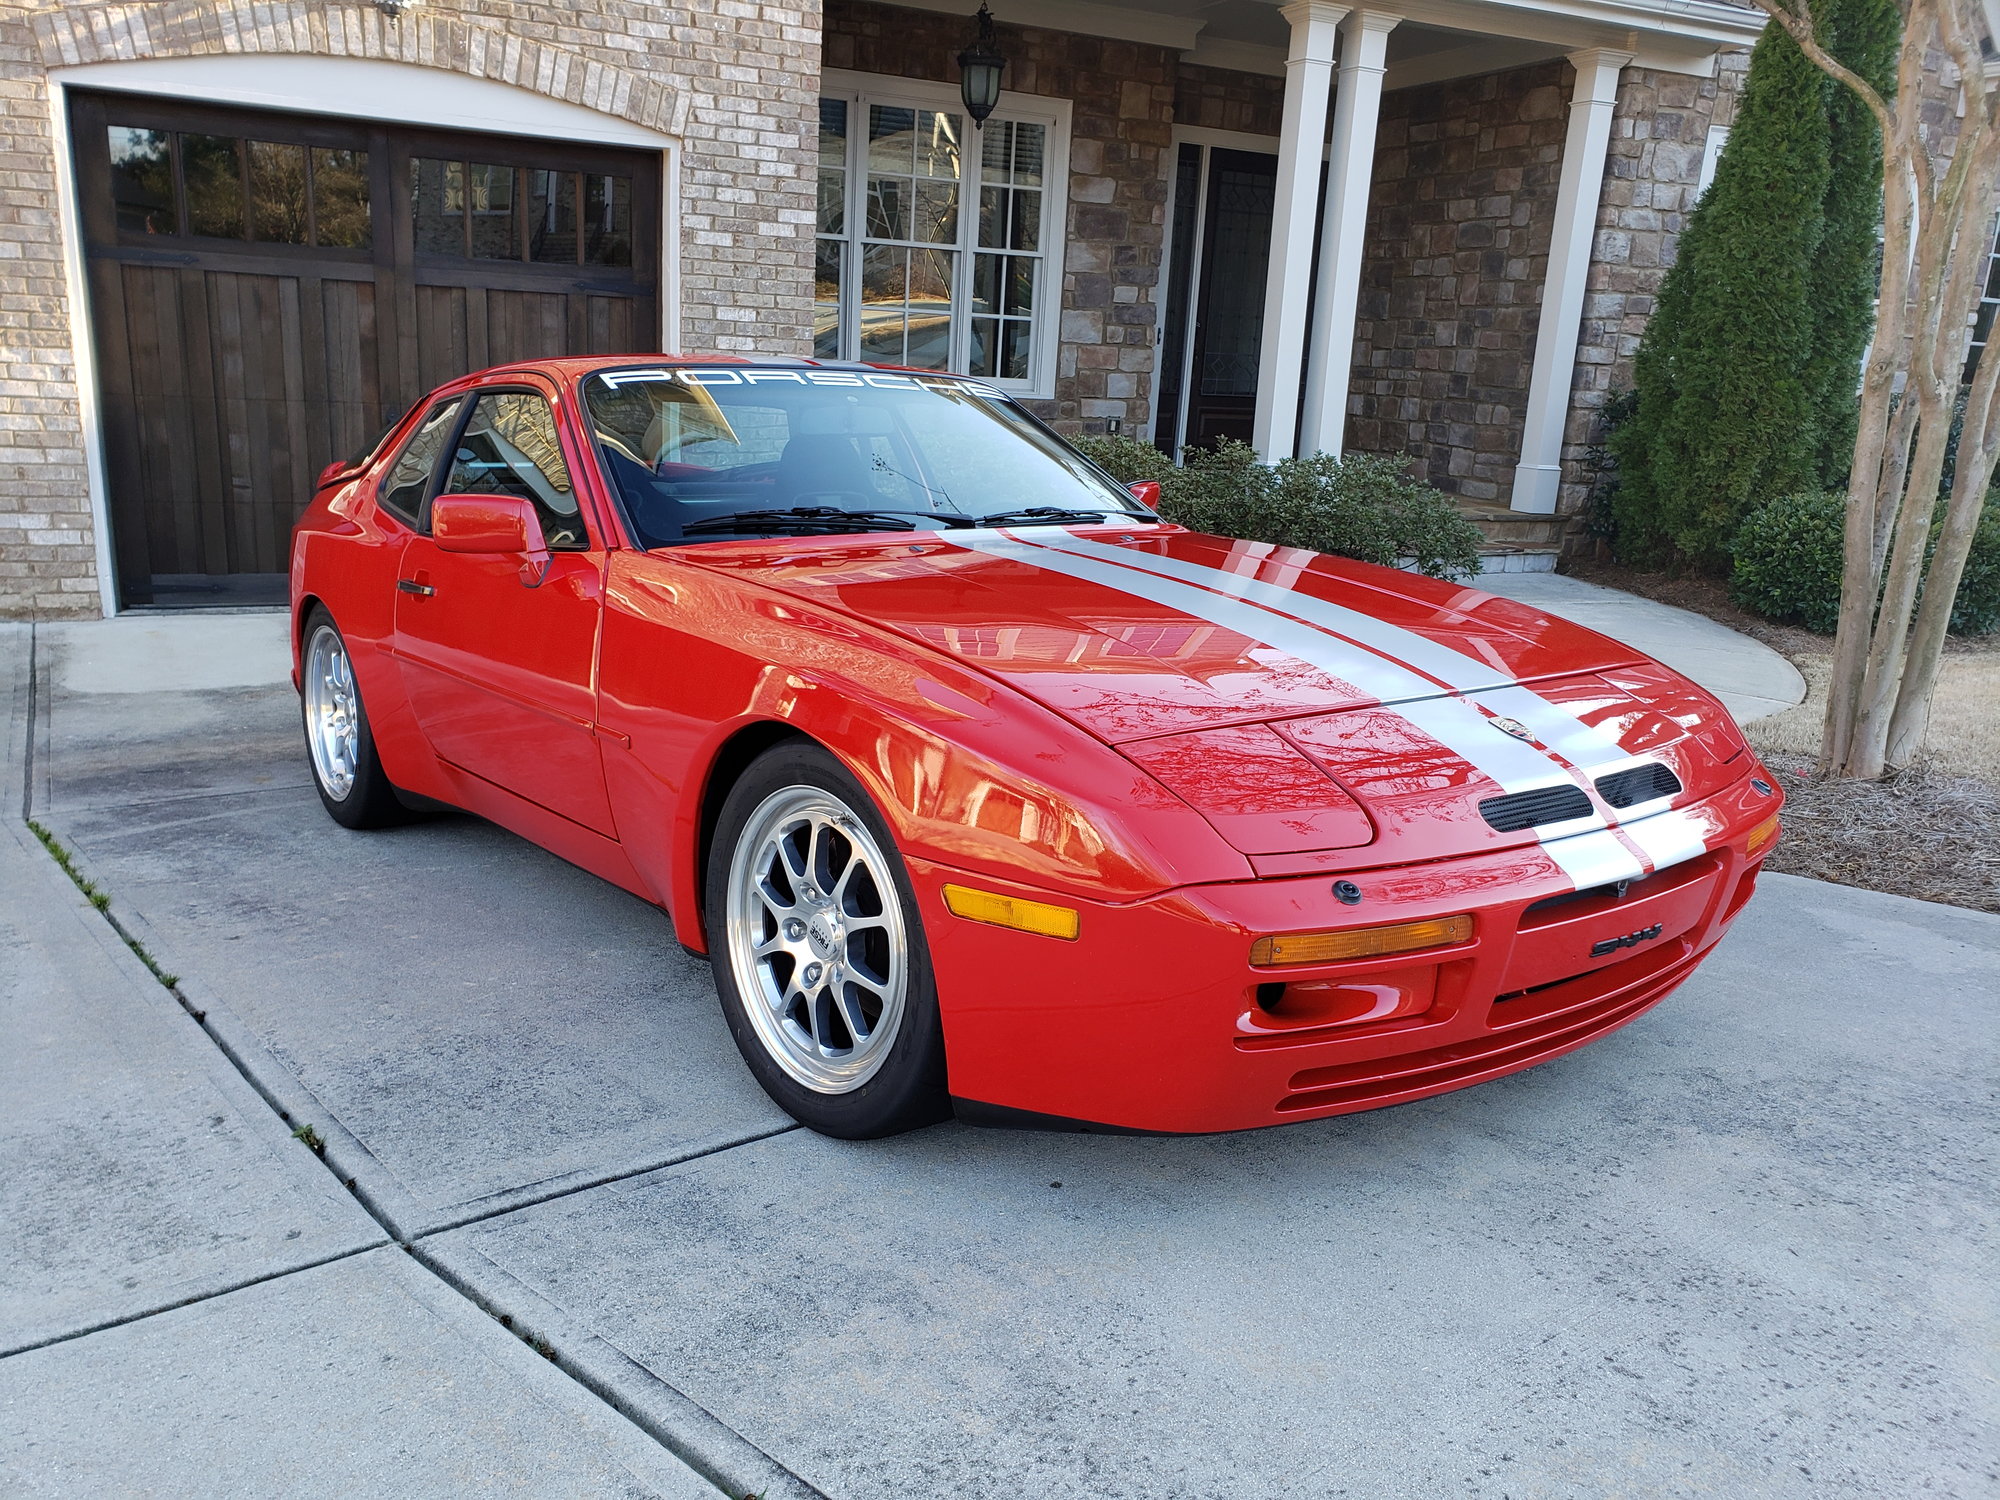 1986 Porsche 944 - The Ultimate 944 Turbo for Street & Track - Used - VIN WP0AA095XGN150162 - 138,000 Miles - 4 cyl - 2WD - Manual - Coupe - Red - Marietta, GA 30062, United States